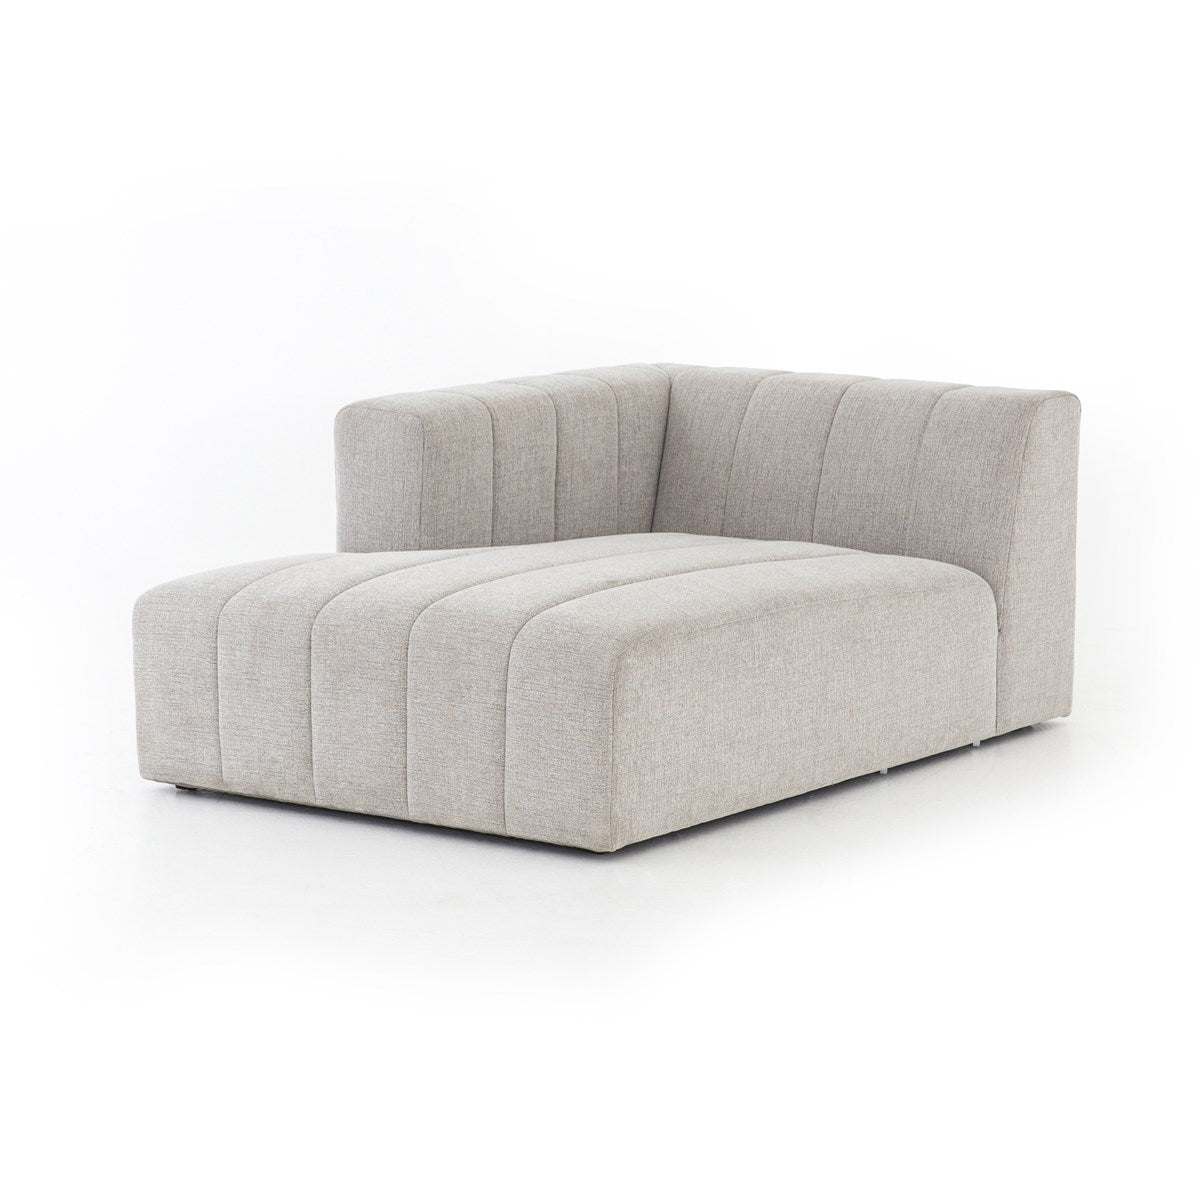 Load image into Gallery viewer, Langham Channeled Sectional Pieces Laf Chaise PieceSectional Sofa Four Hands  Laf Chaise Piece   Four Hands, Burke Decor, Mid Century Modern Furniture, Old Bones Furniture Company, Old Bones Co, Modern Mid Century, Designer Furniture, https://www.oldbonesco.com/
